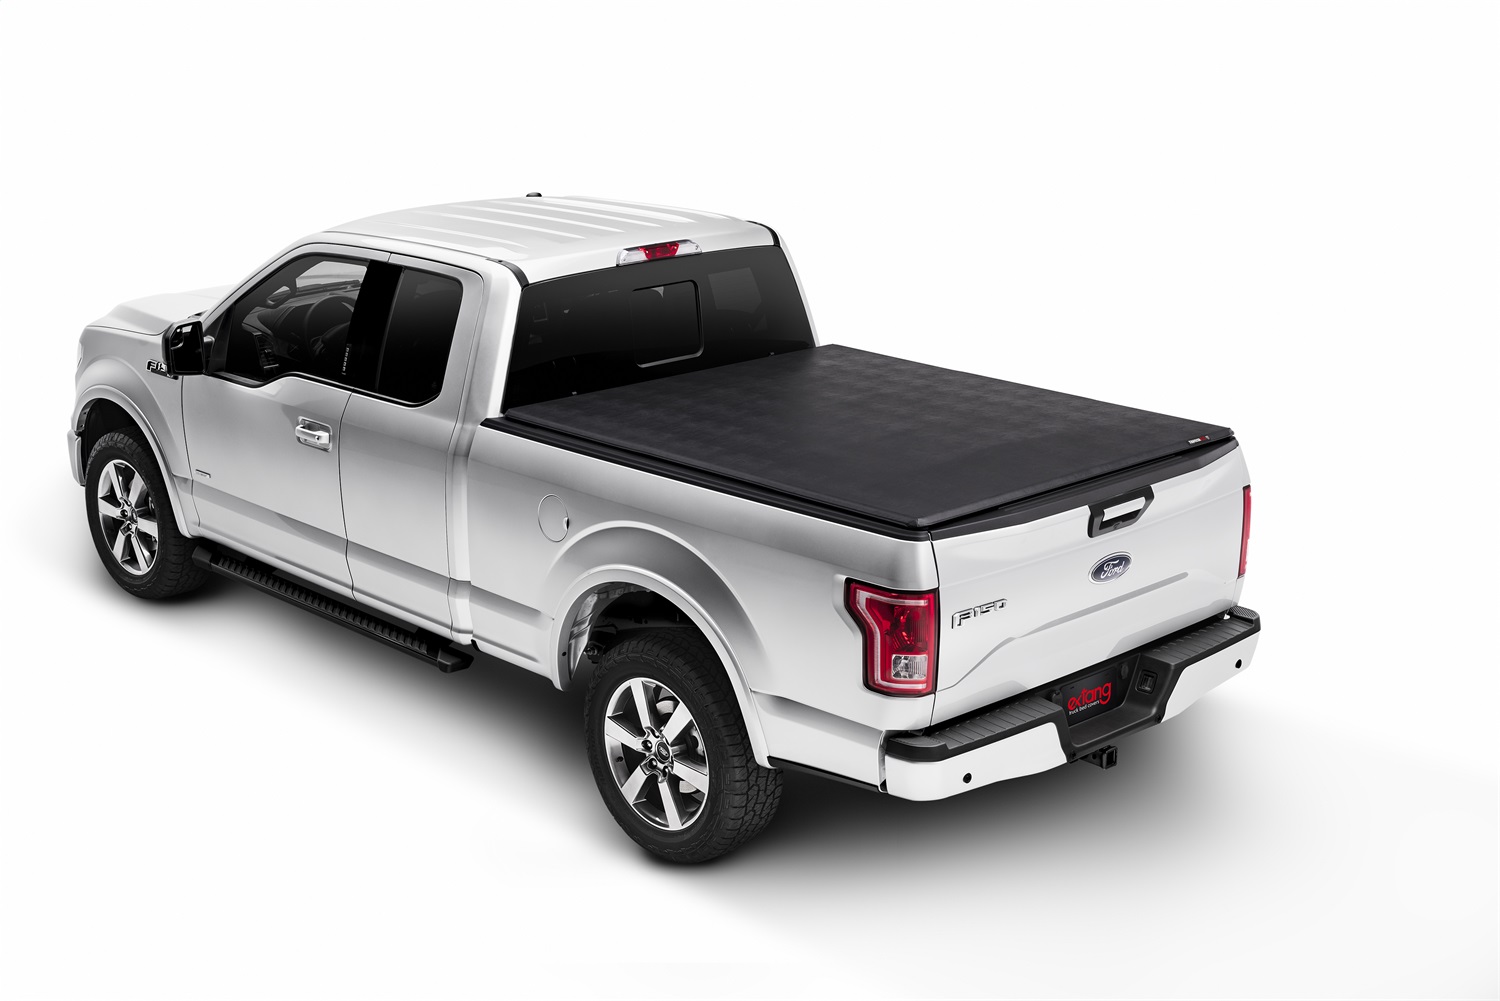 Trifecta 2.0 Tonneau Cover for 1982-2011 Ford Ranger Long Bed